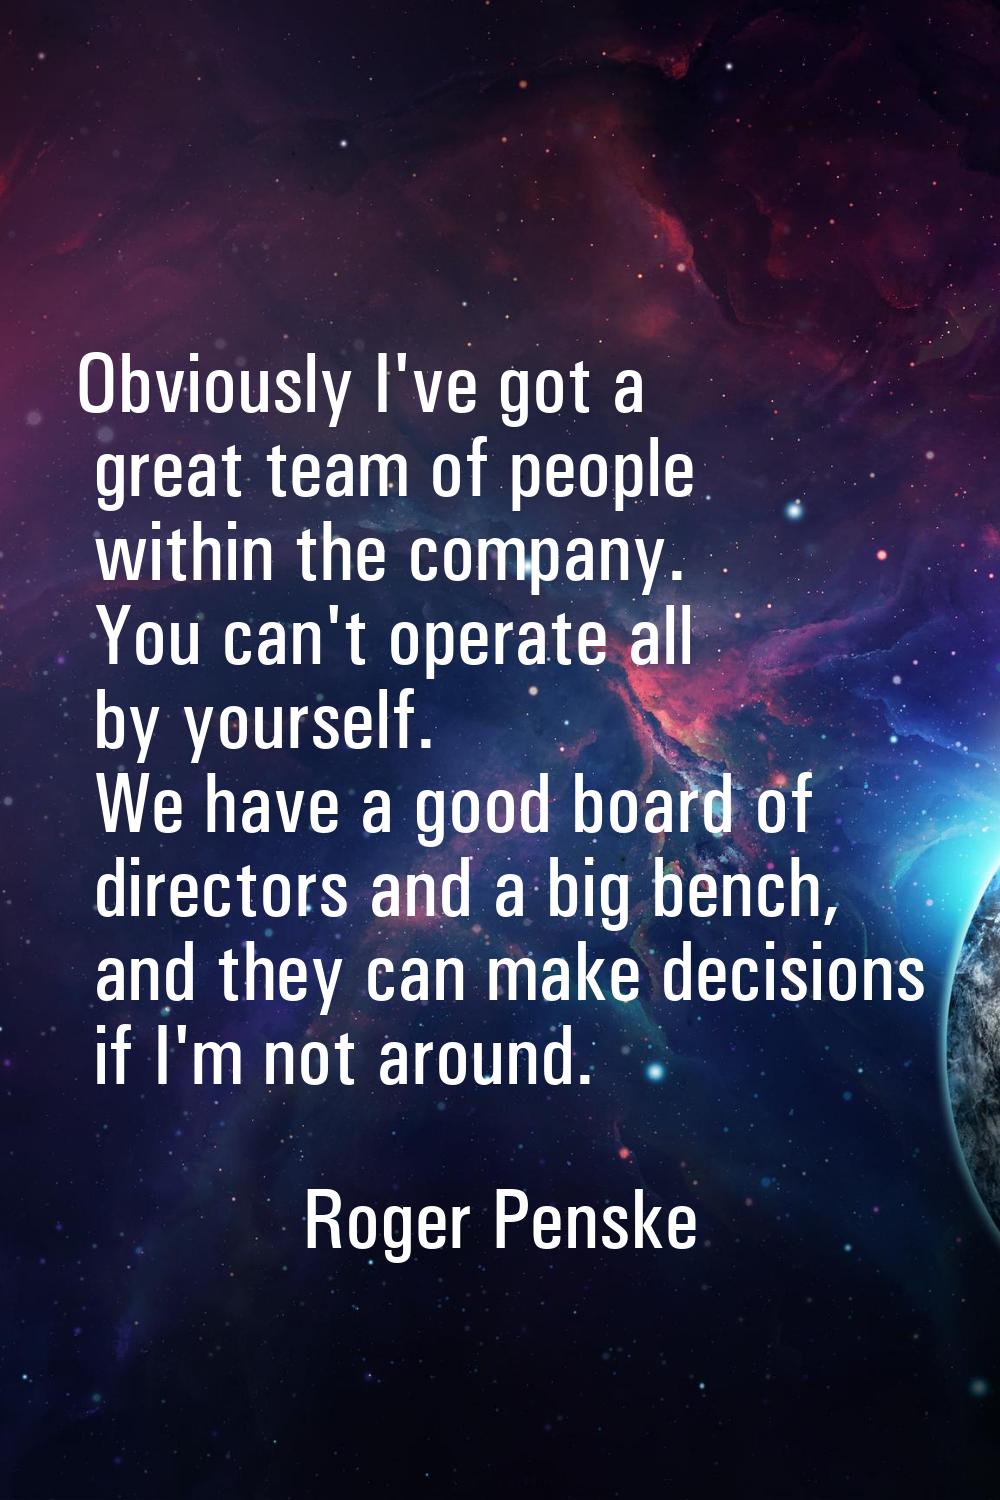 Obviously I've got a great team of people within the company. You can't operate all by yourself. We